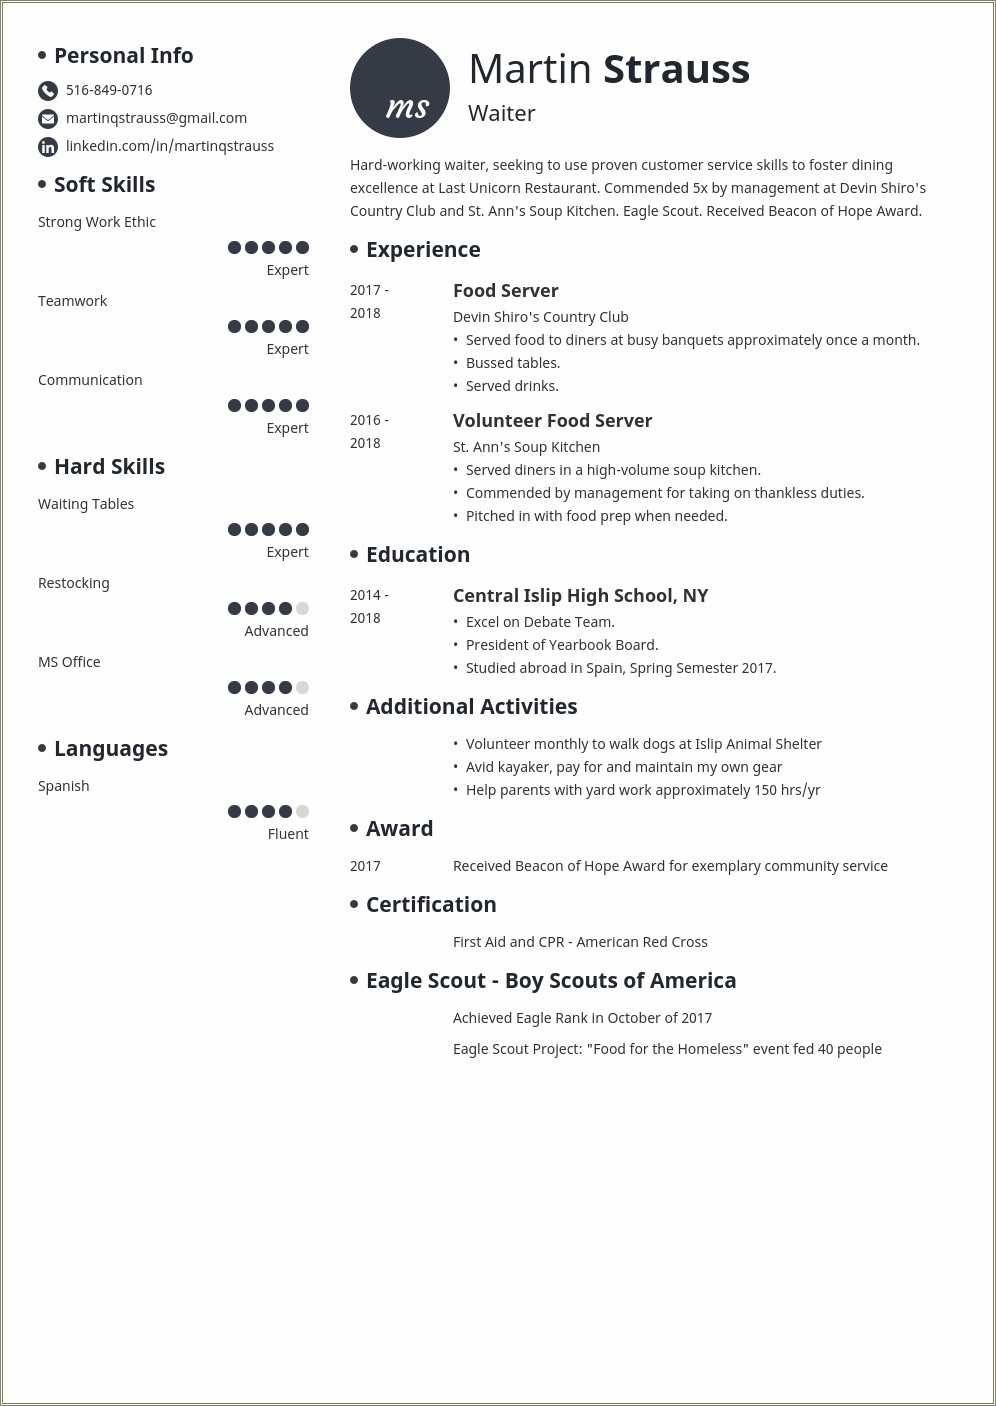 Resume Examples For Teens For Fast Food Resytaurats - Resume Example ...